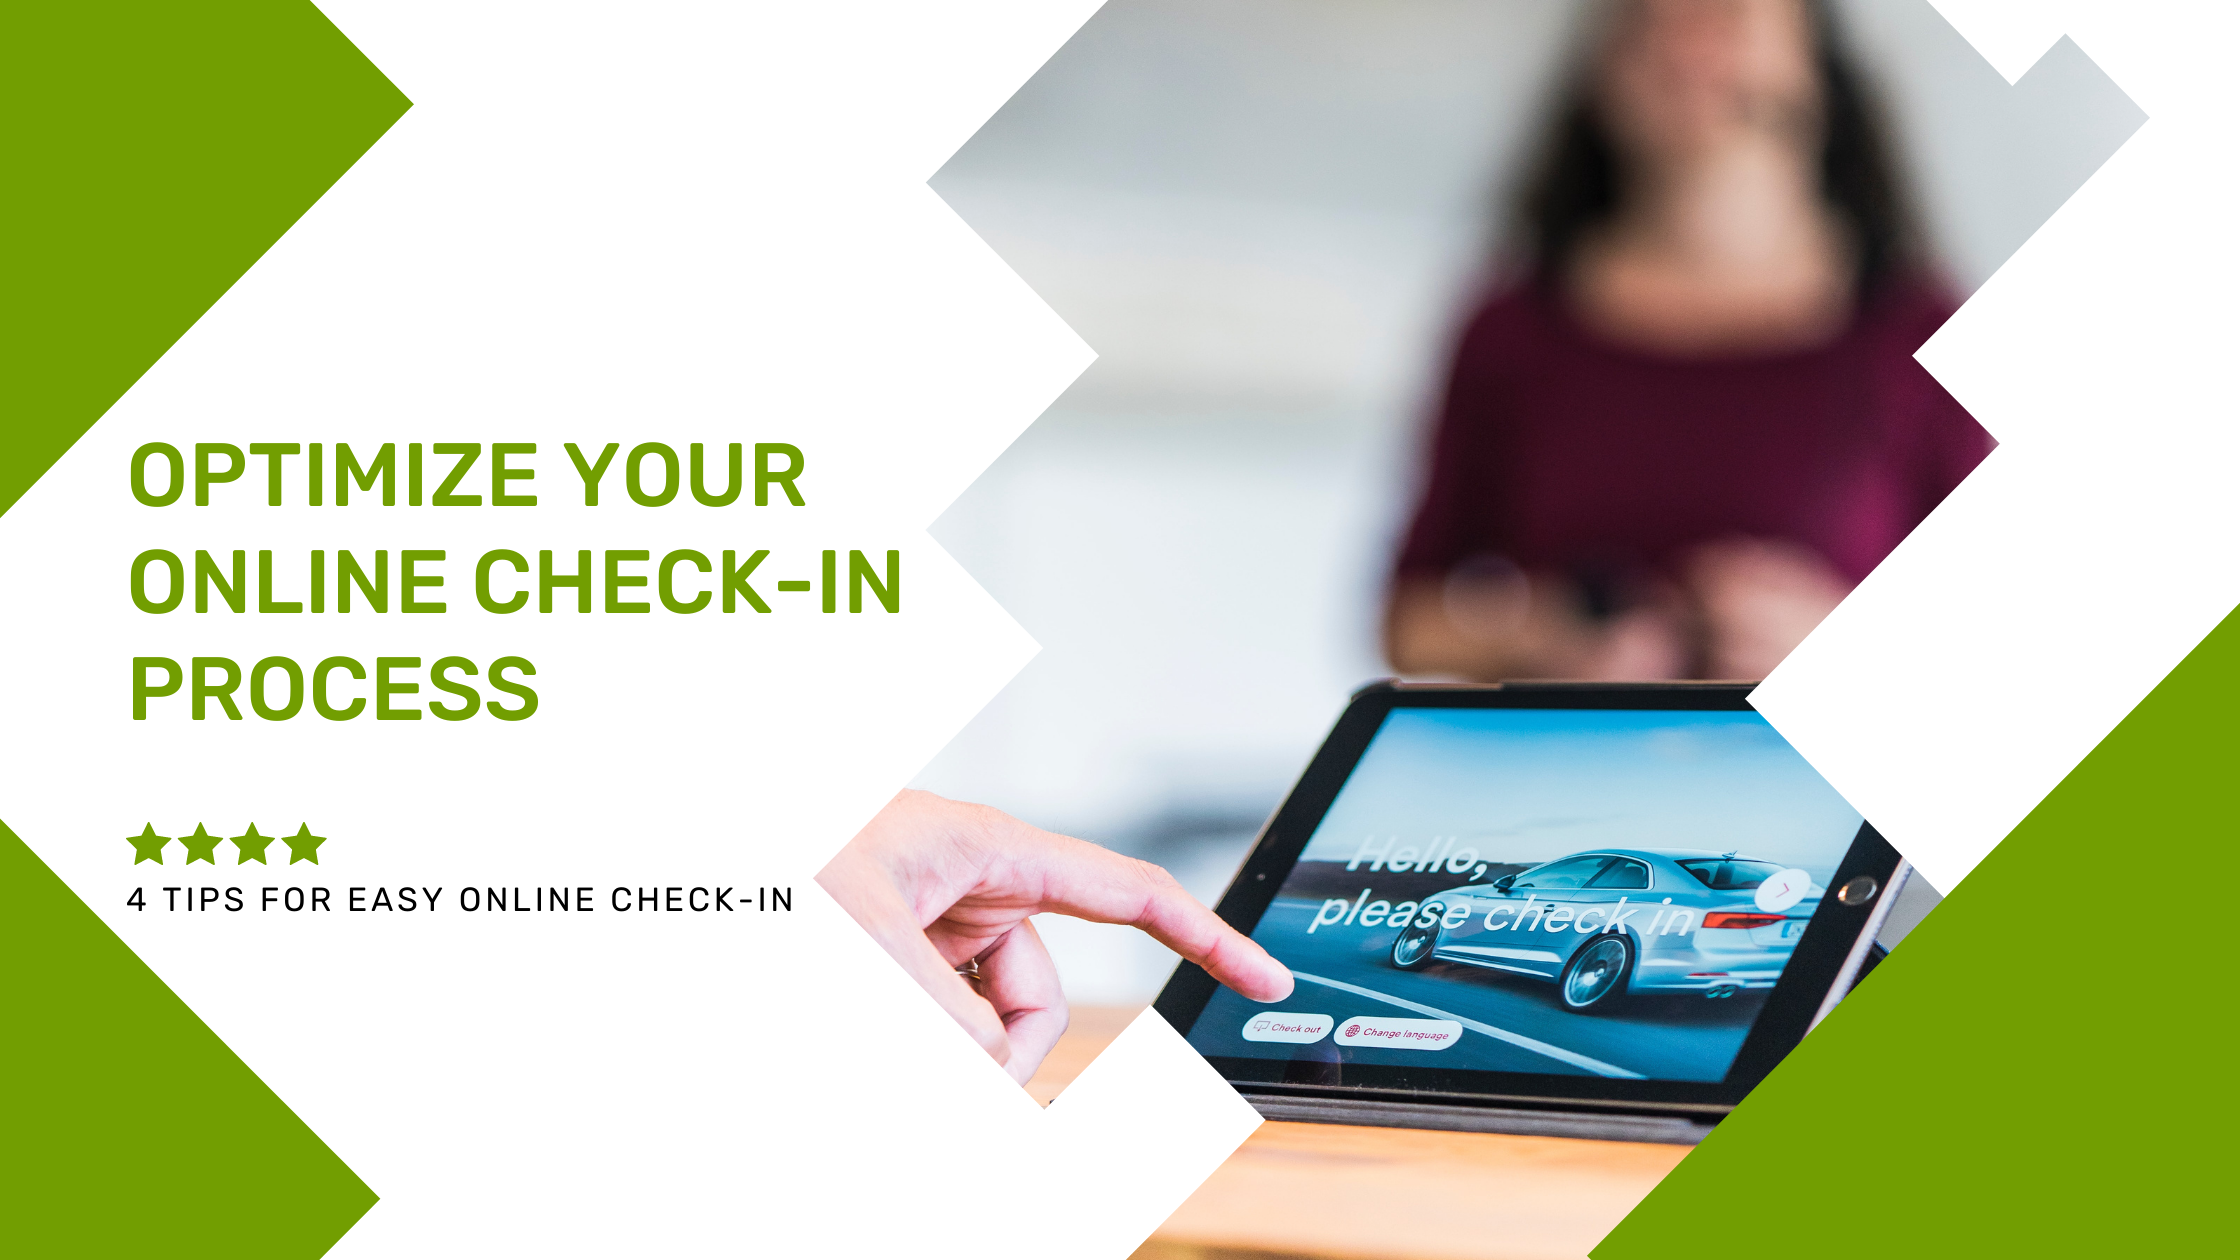 Optimize Your Online Check-in Process: 4 Tips